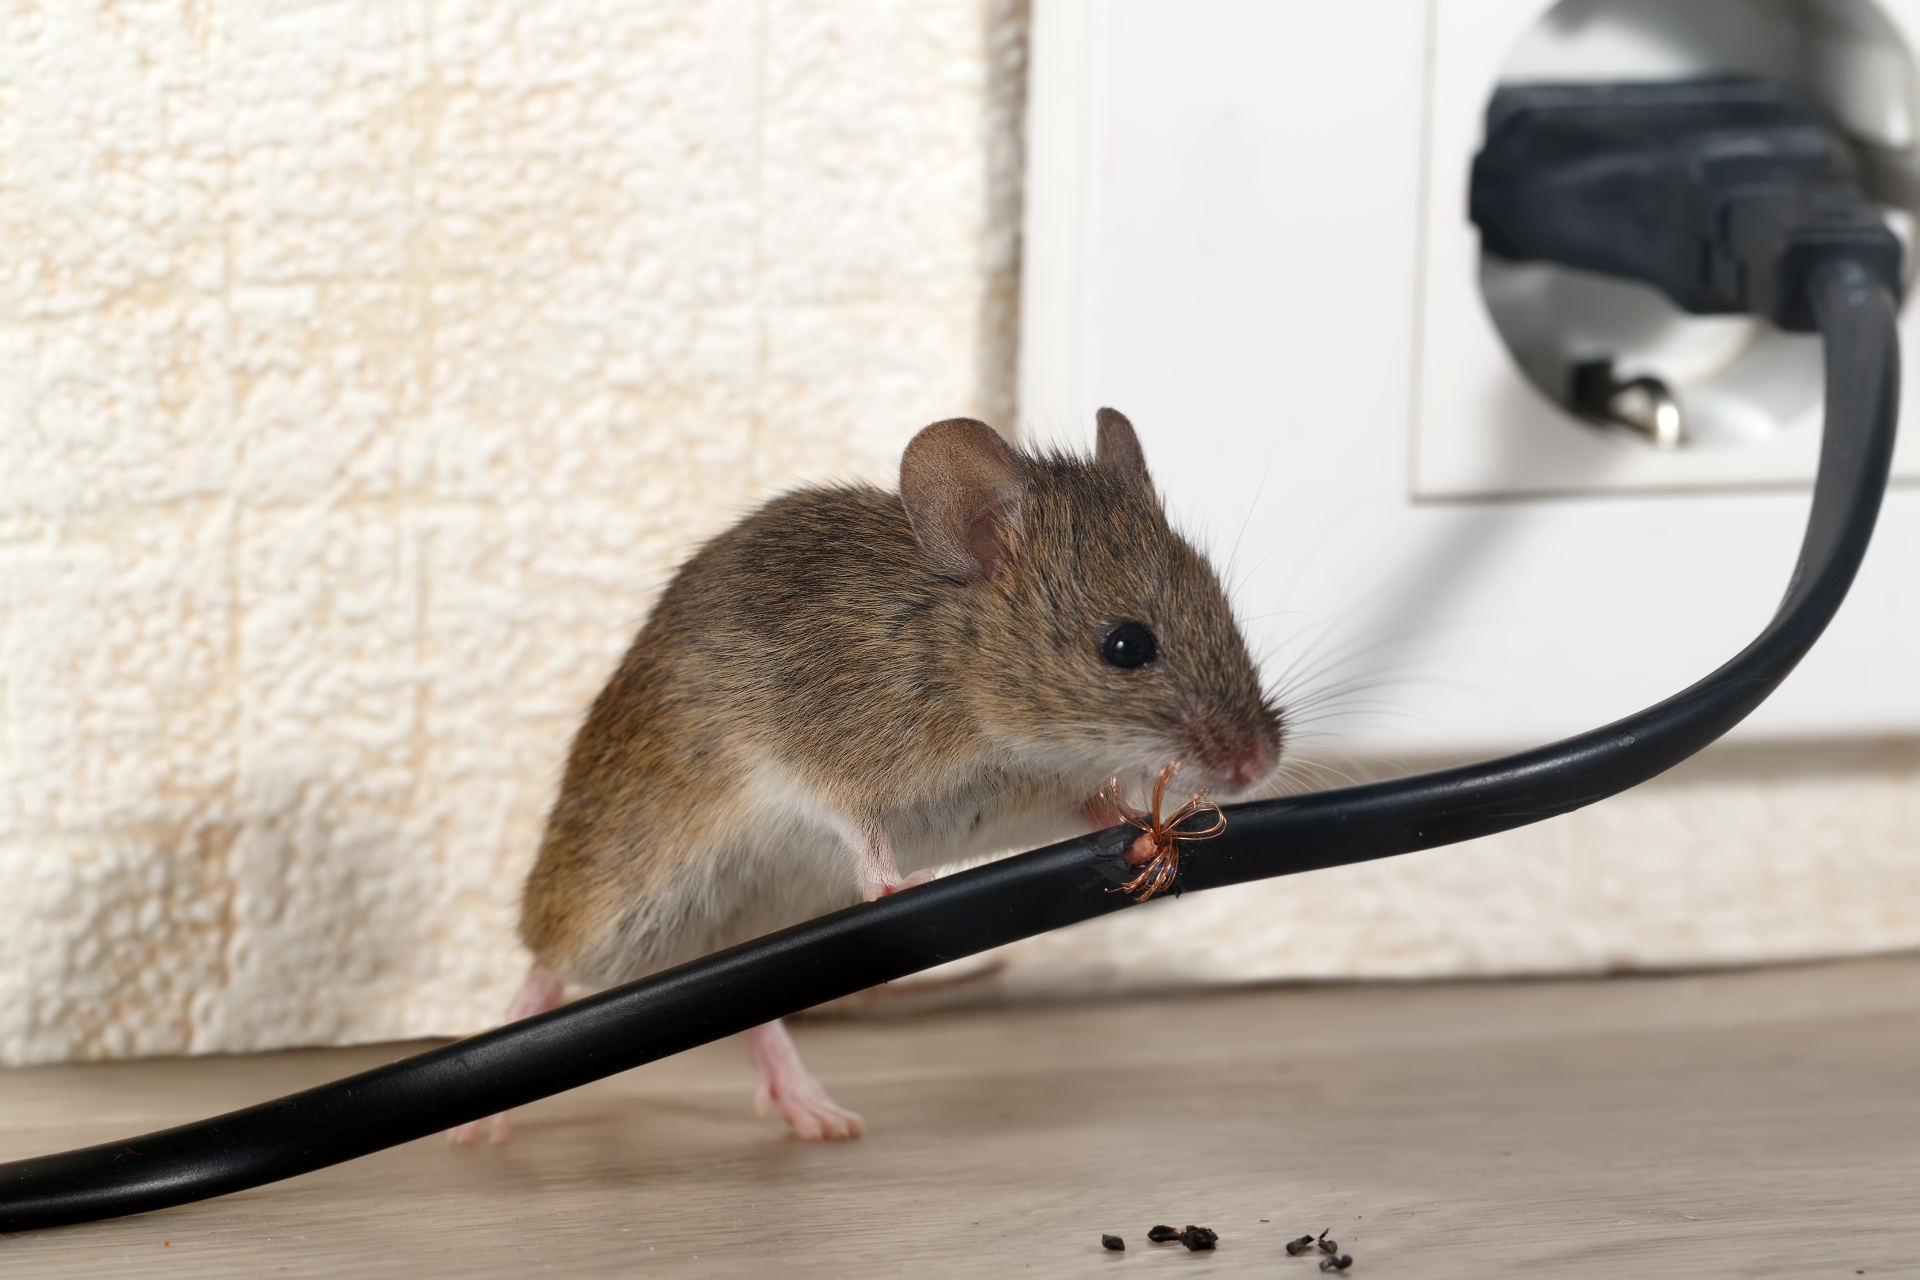 Mice Infestation, Pest Control in Stamford Hill, Stoke Newington, N16. Call Now 020 8166 9746